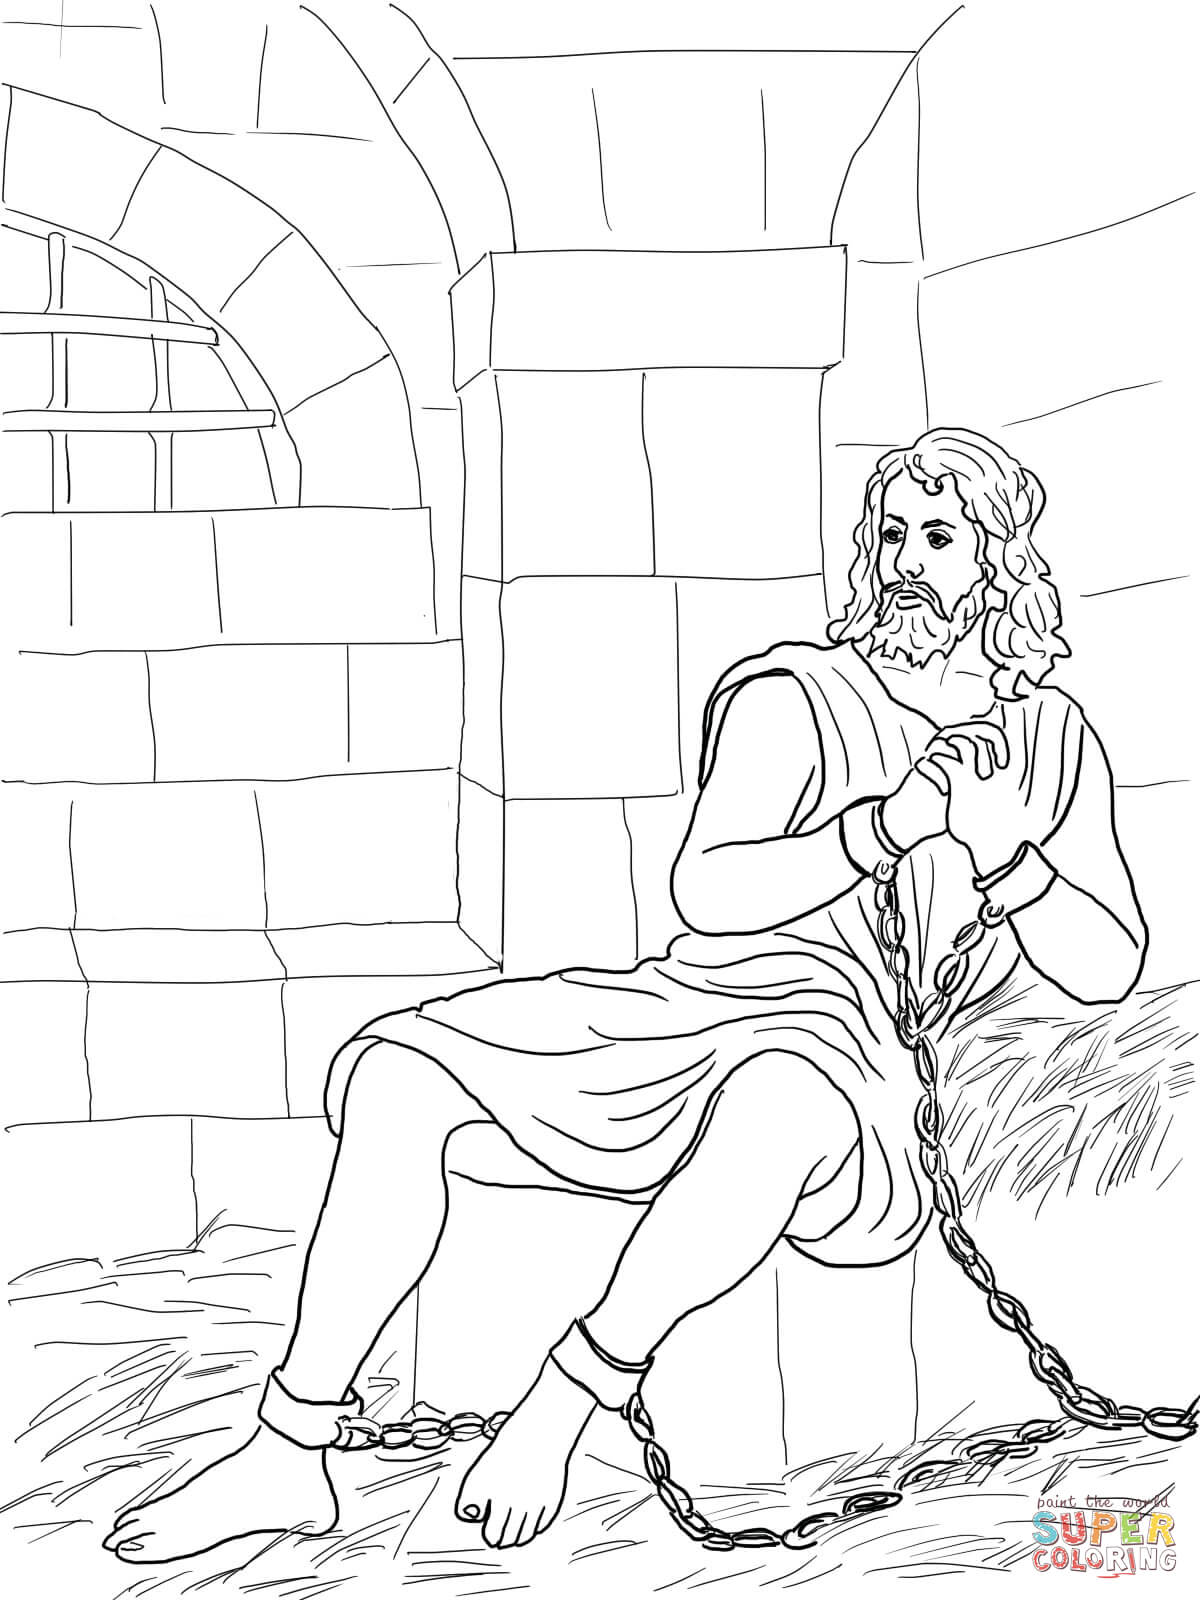 Peter In Prison Coloring Page - Coloring Home